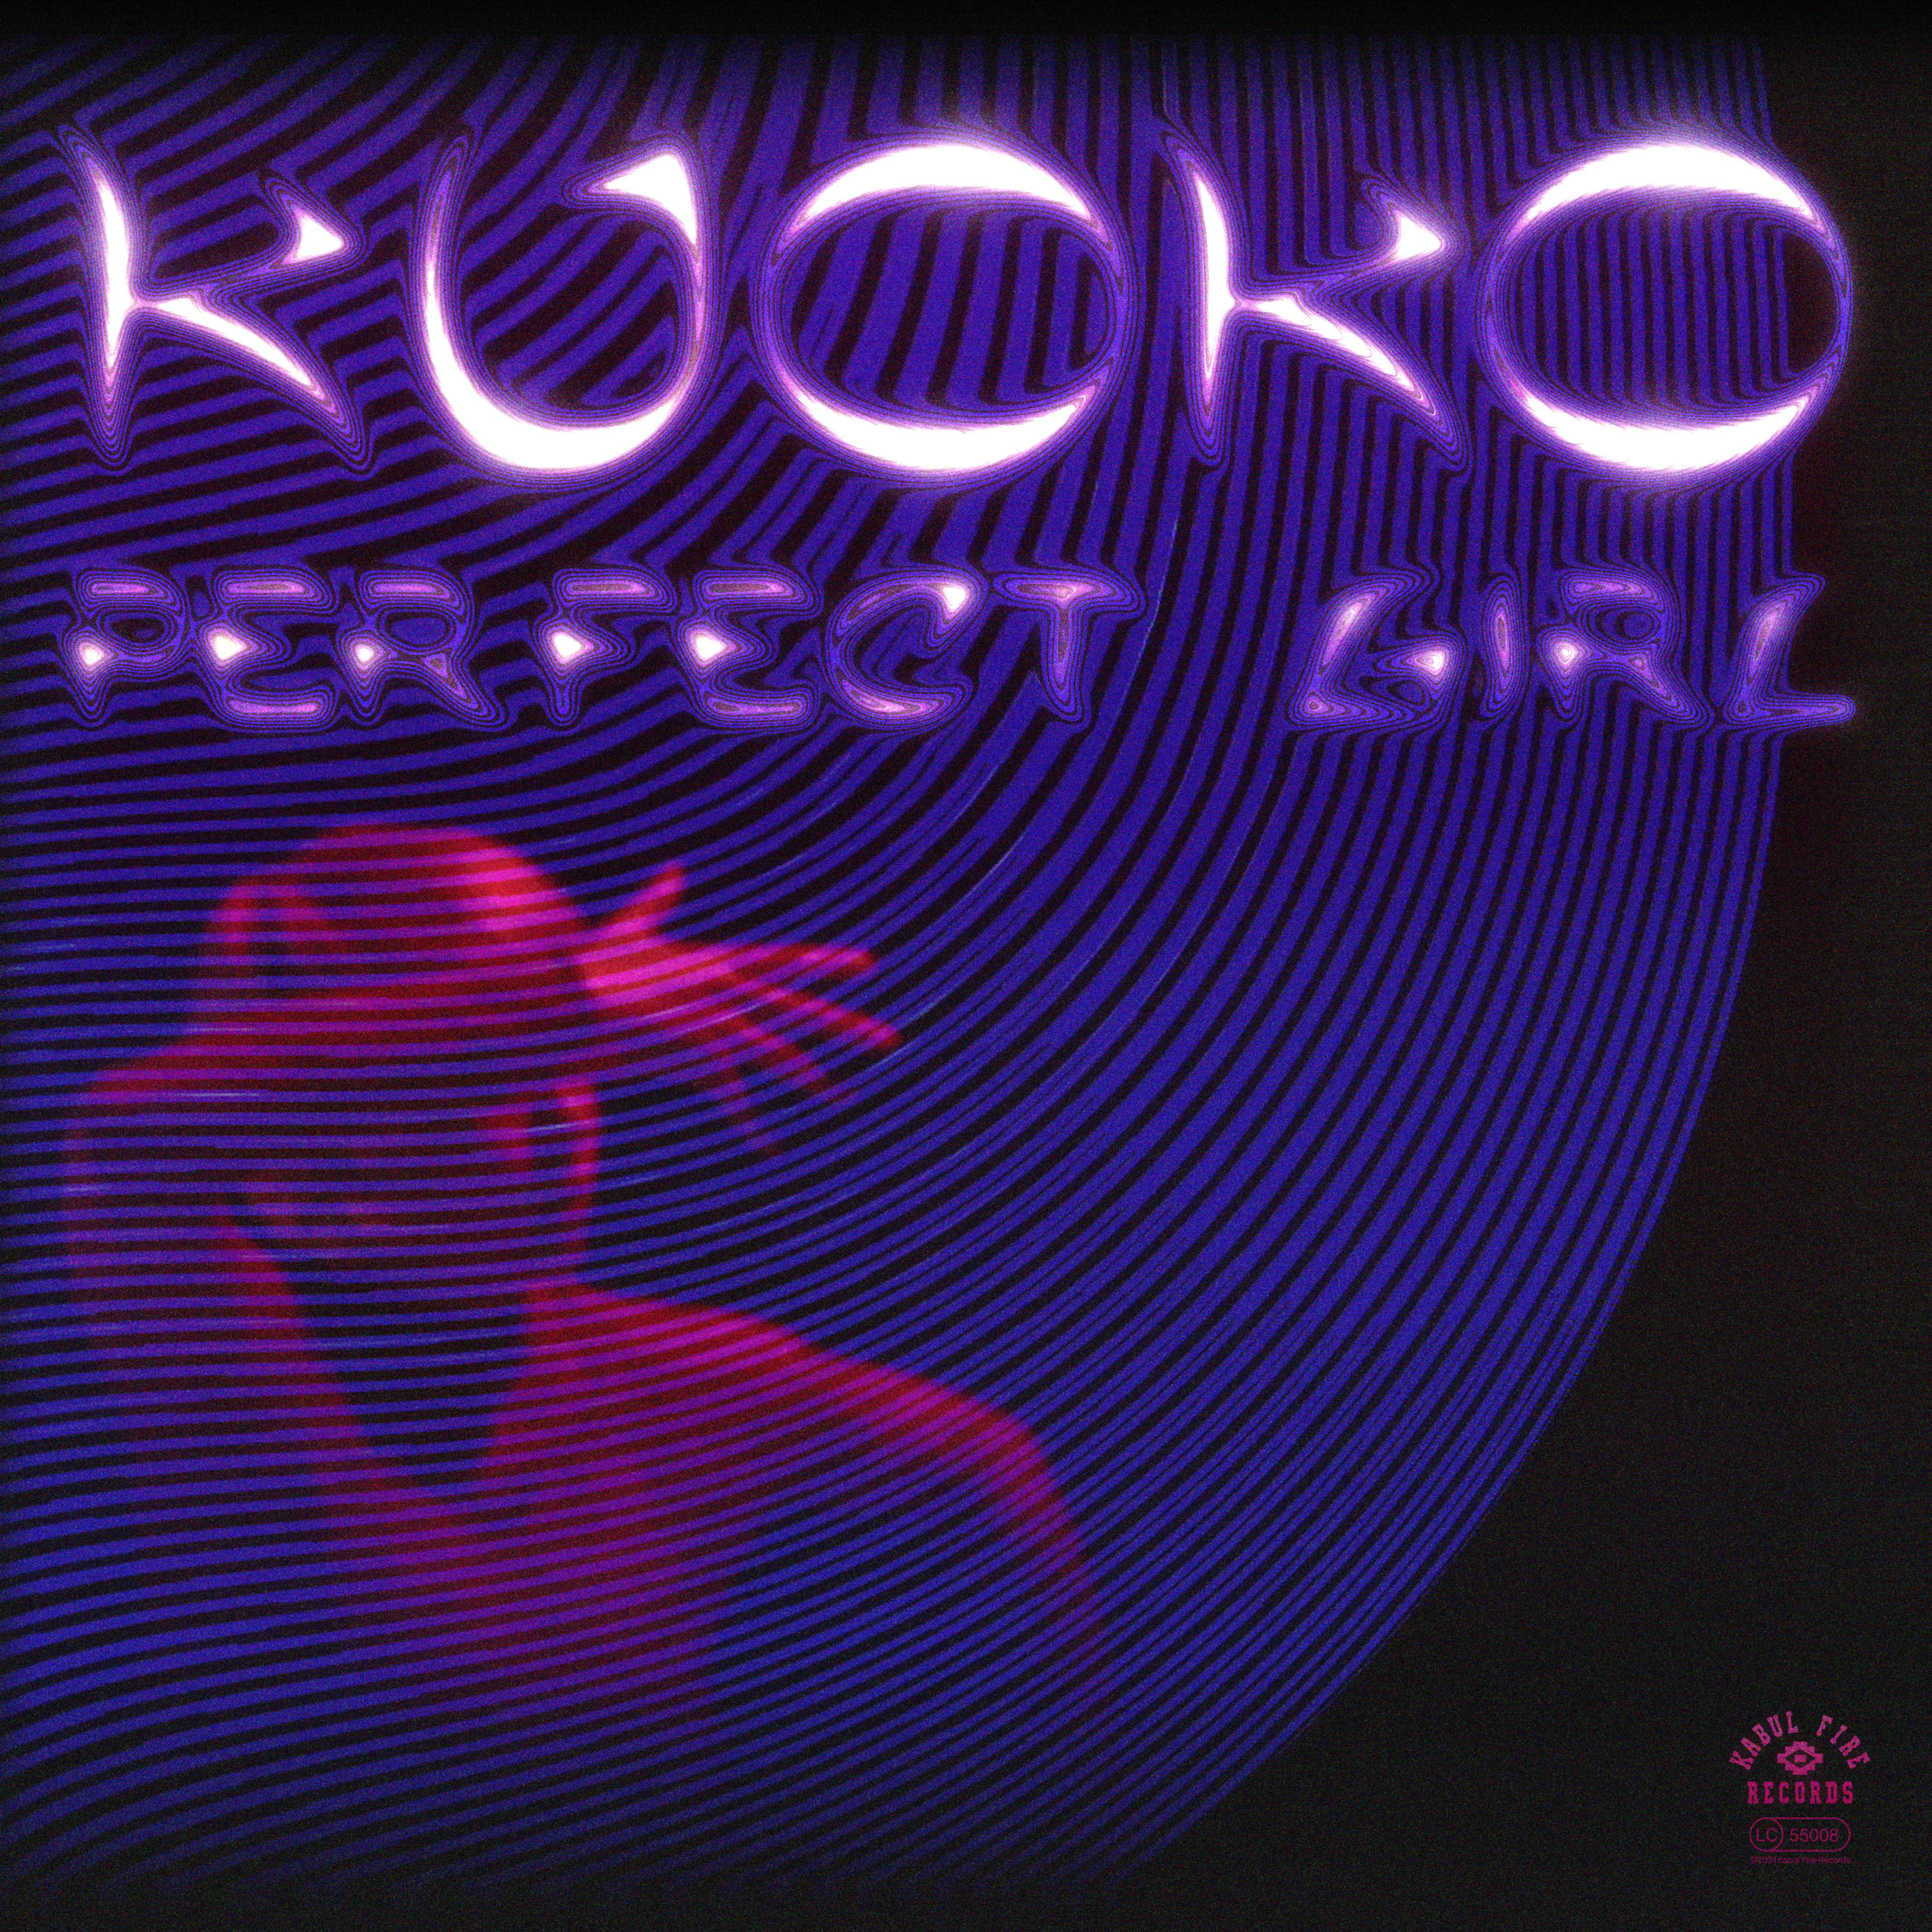 KUOKO Perfect Girl Single Cover v4 02 scaled